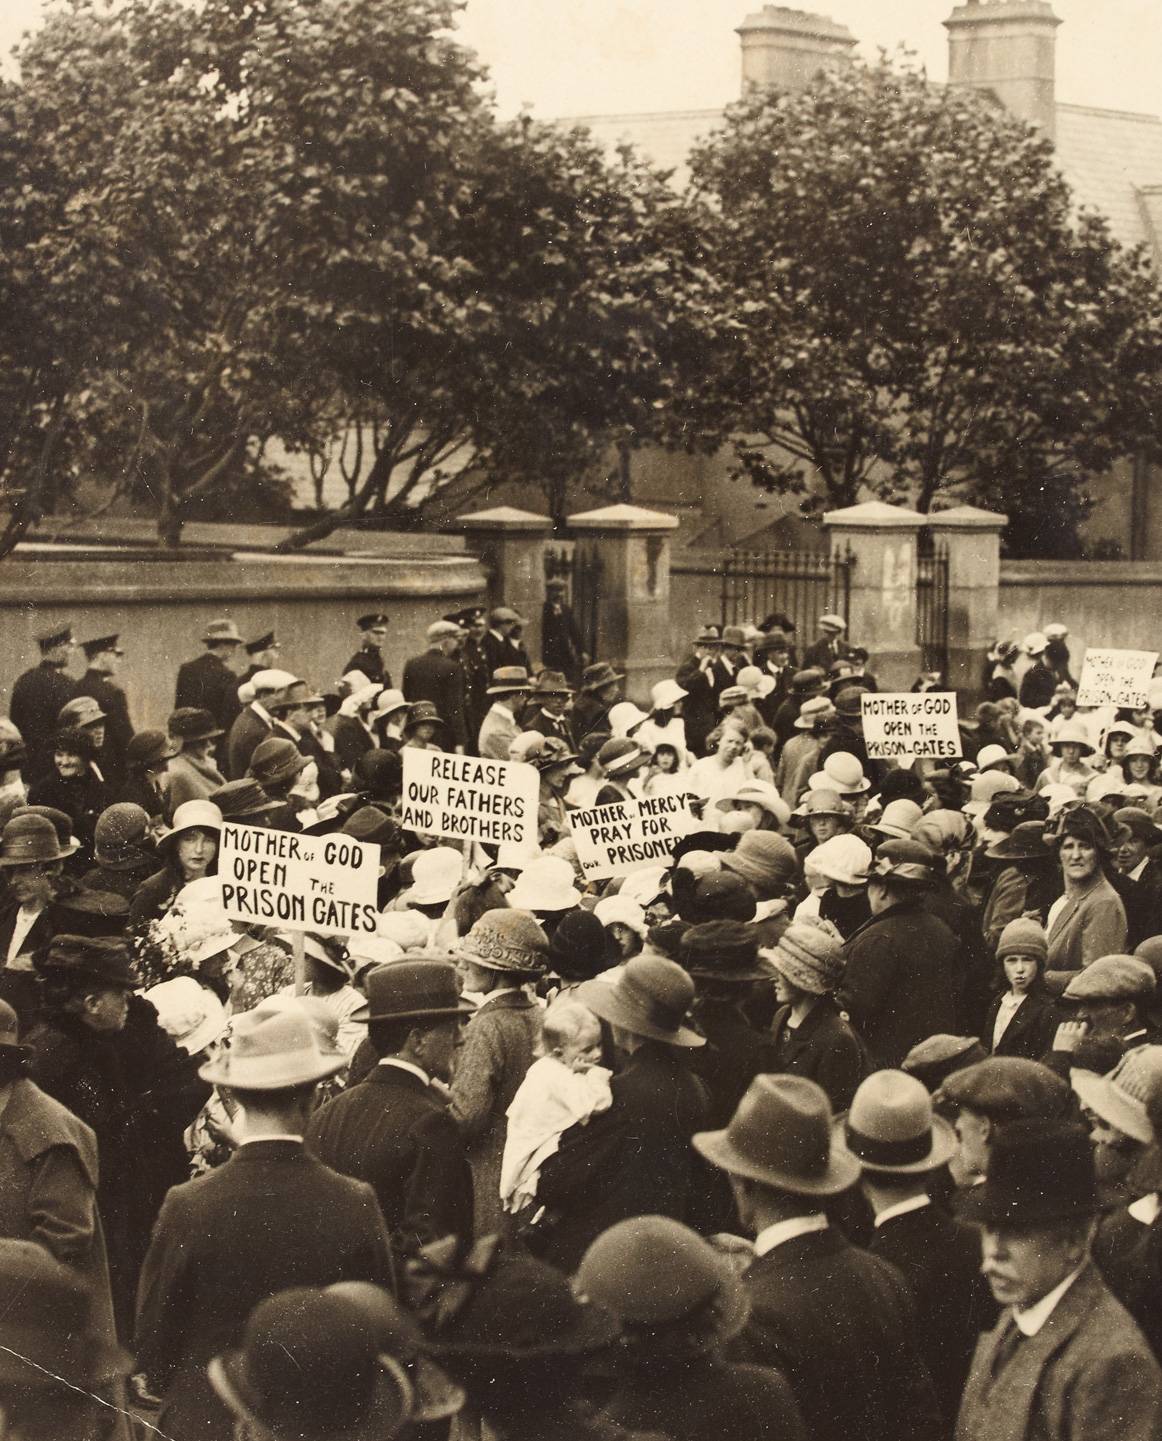 Cumann na mBan protest outside Mountjoy Prison during the Irish War of Independence. 23 July 1921. National Library of Ireland HOG165.